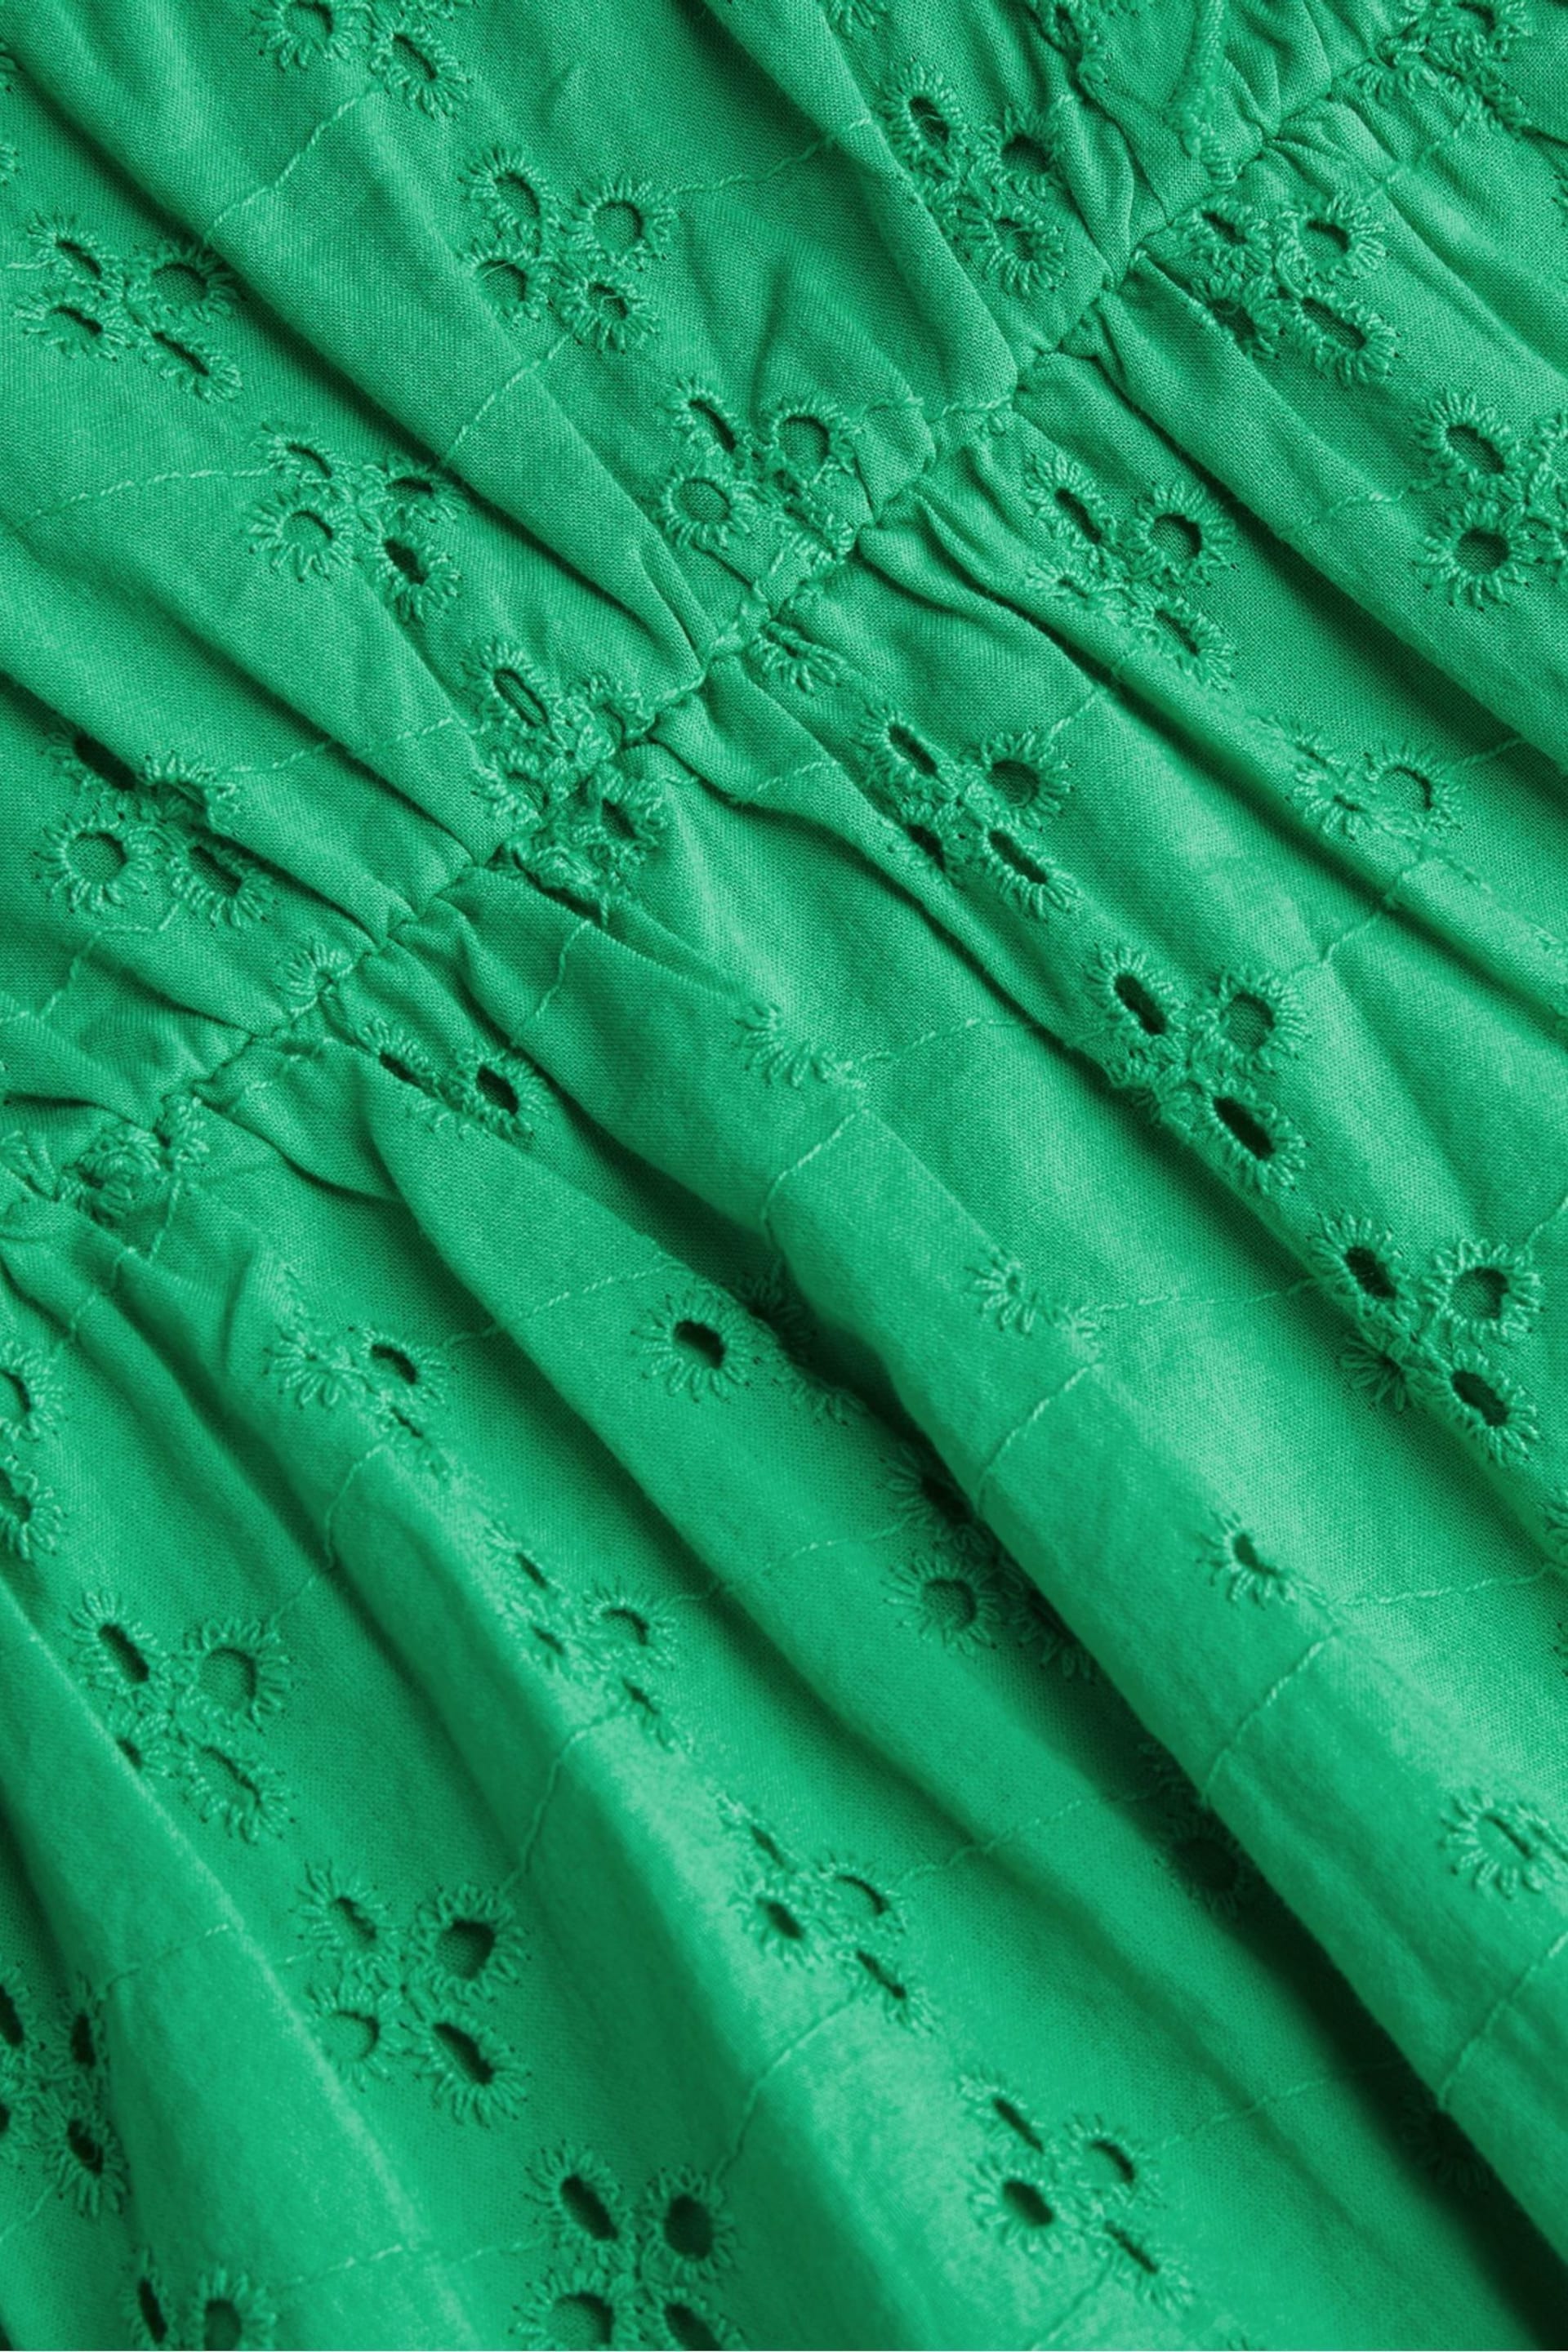 Monsoon Green Broderie Frill Dress - Image 3 of 3